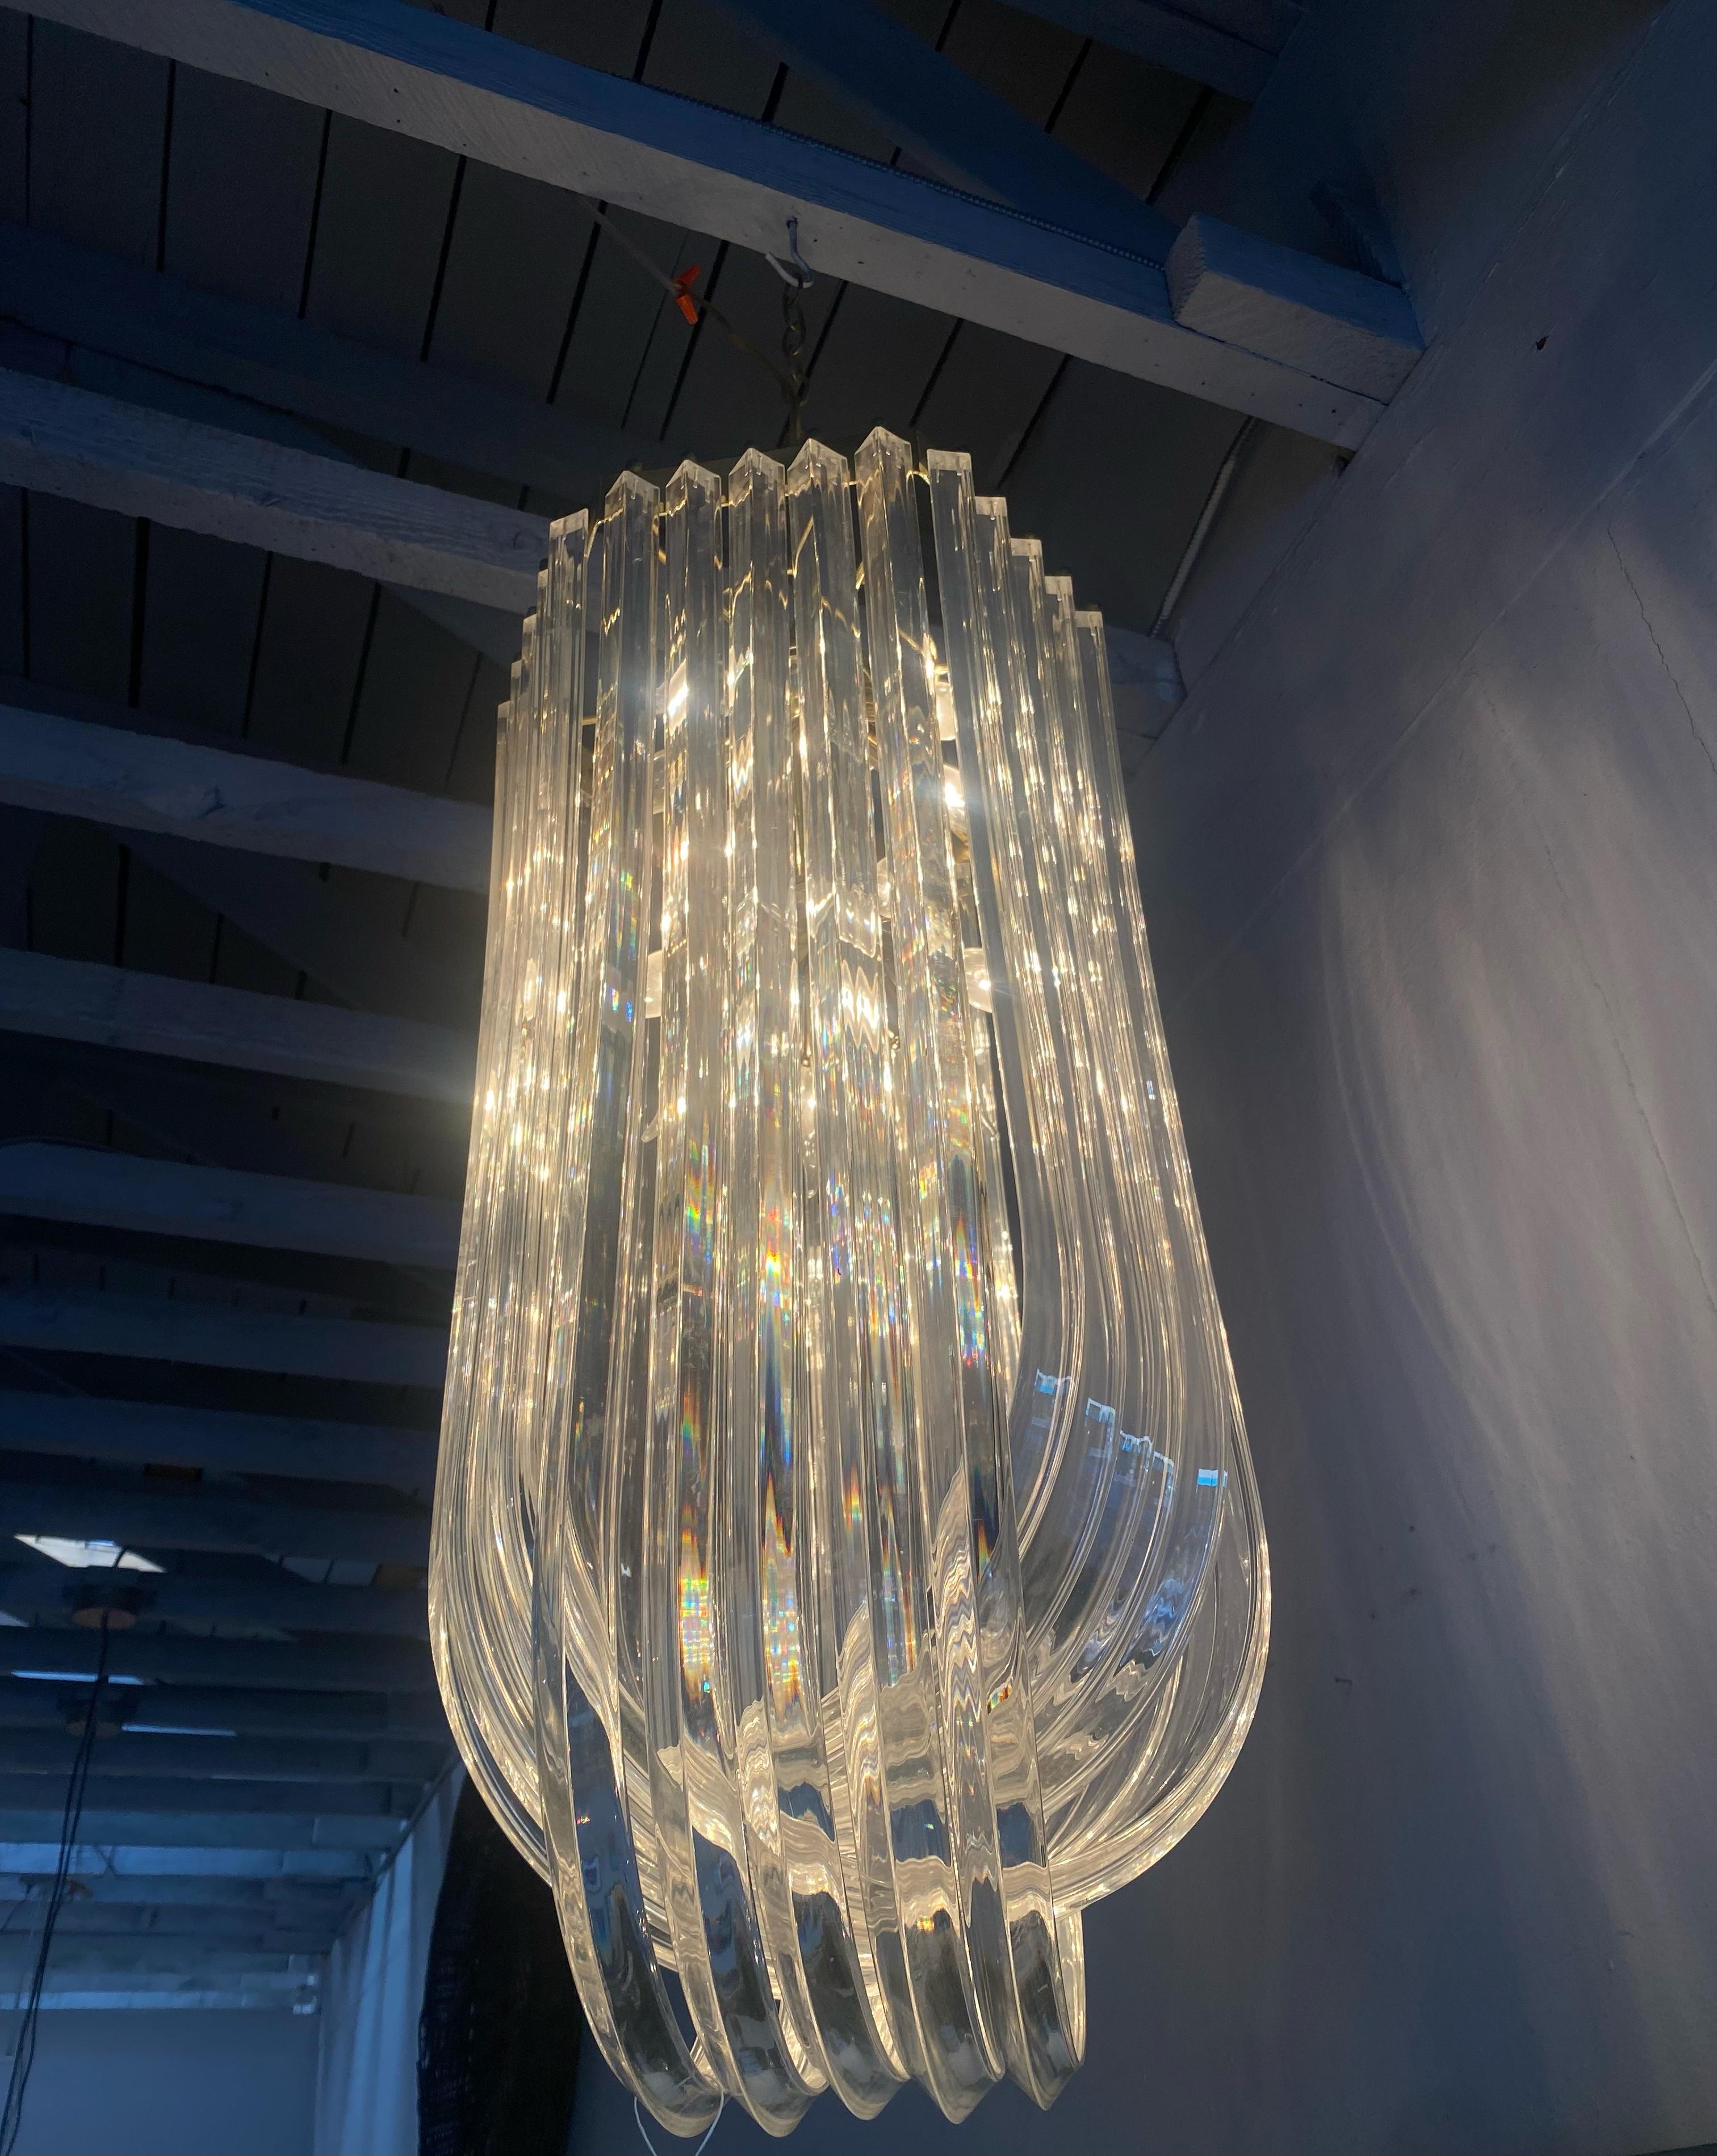 Stunning chandelier made from three tiers of overlapping lucite.